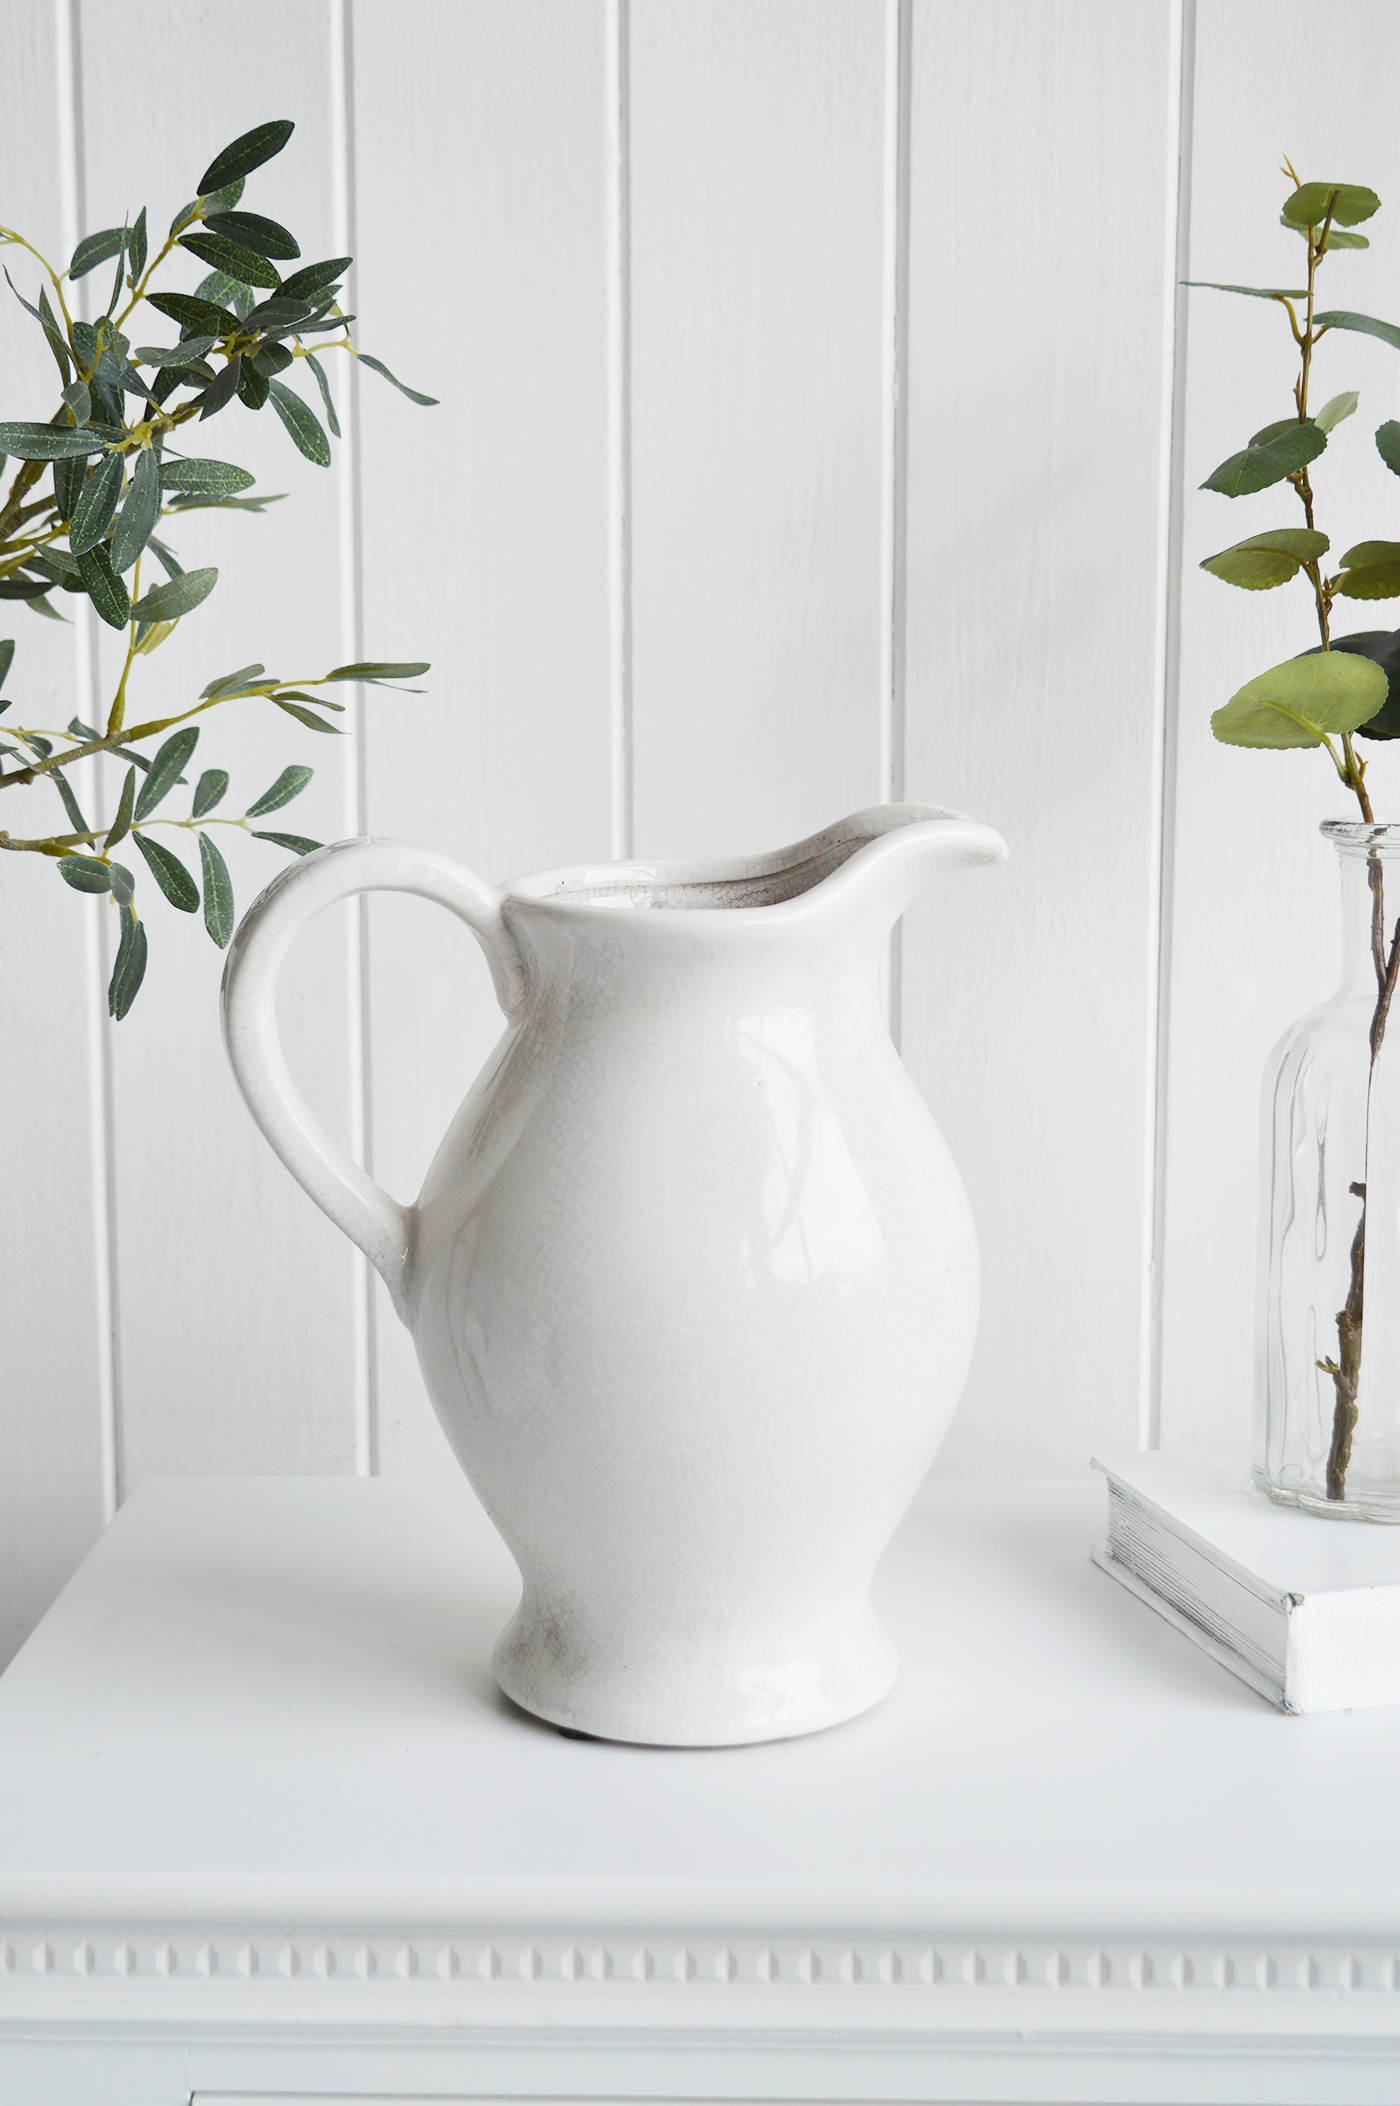 White Ceramic Jug / Vase -  New England style Country and Coastal Furniture and Interiors